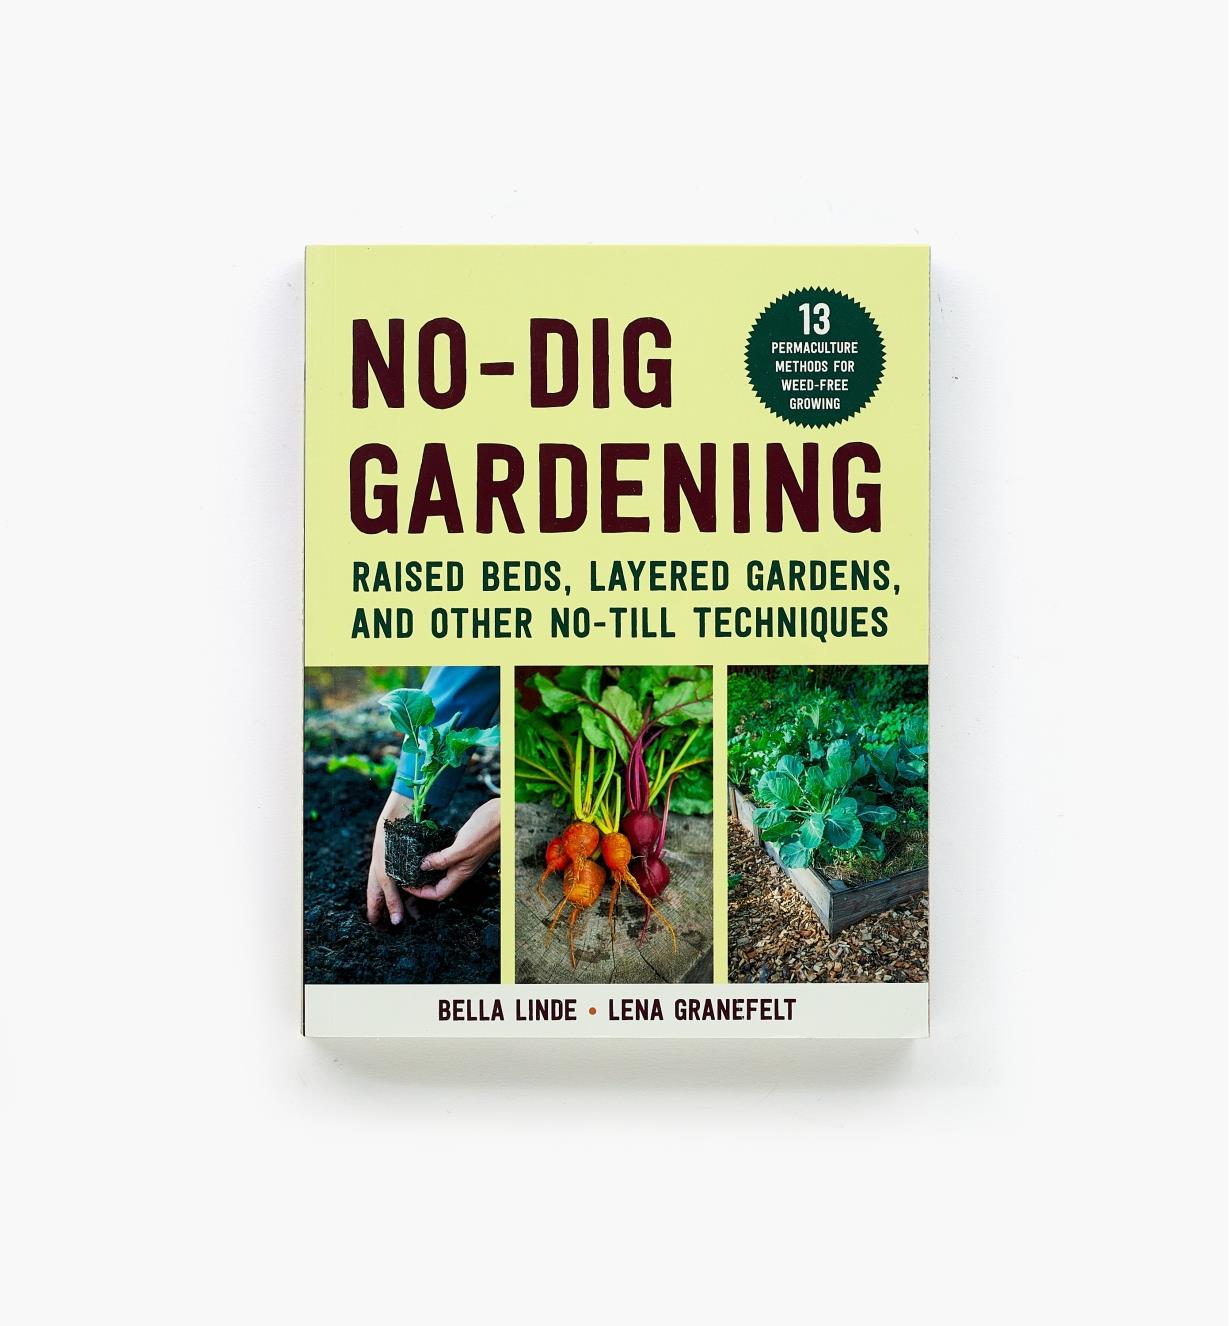 LA660 - No-Dig Gardening – Raised Beds, Layered Gardens and Other No-Till Techniques